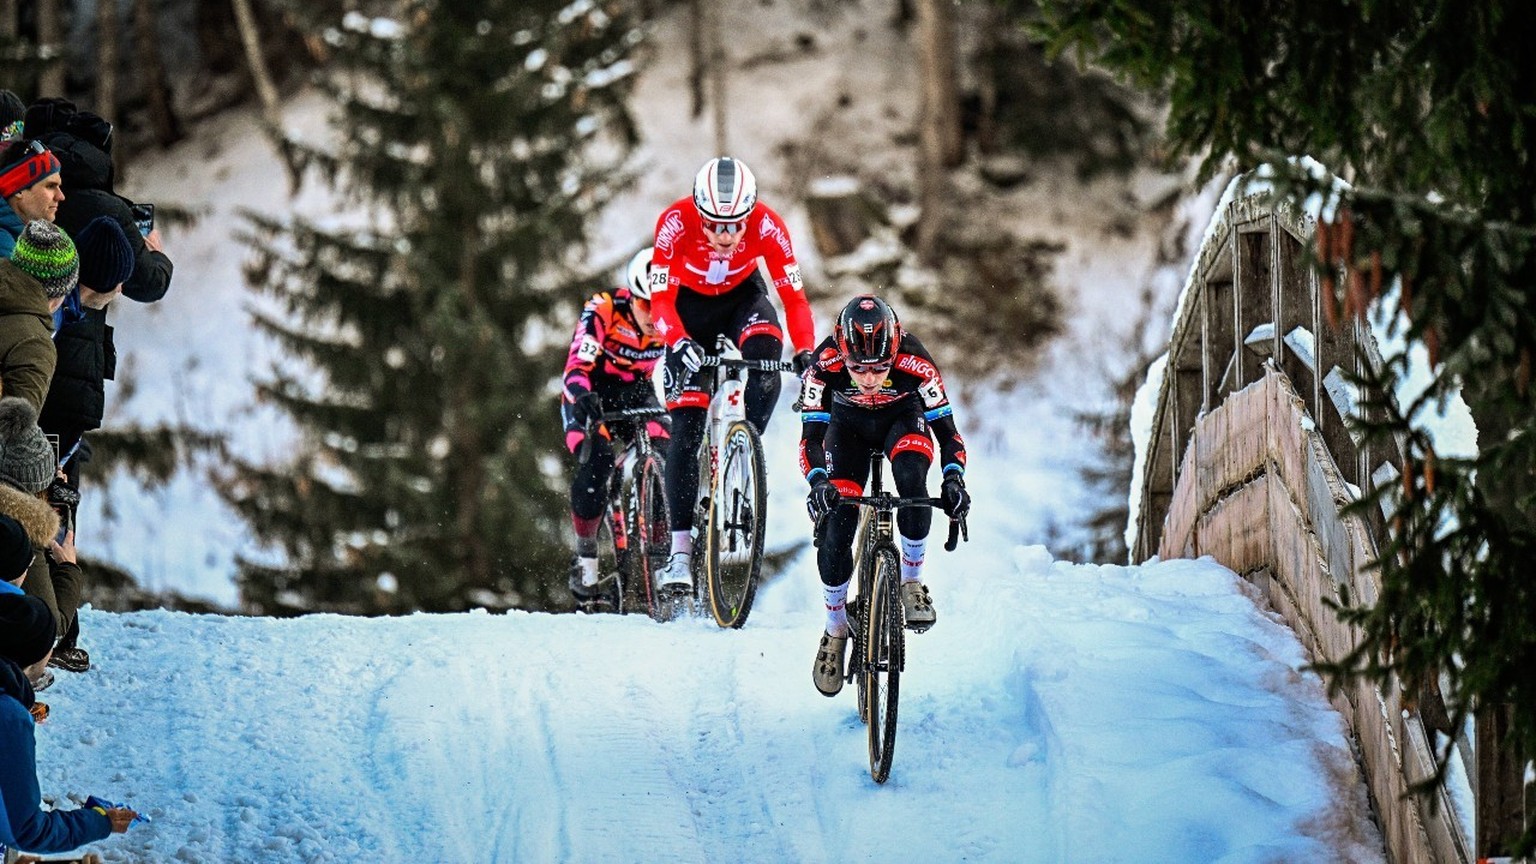 IMAGO / Belga

Swiss Kevin Kuhn and Belgian Eli Iserbyt pictured in action during the men s elite race of the Cyclocross World Cup race in Val di Sole, Italy, Saturday 17 December 2022, stage ten (out ...